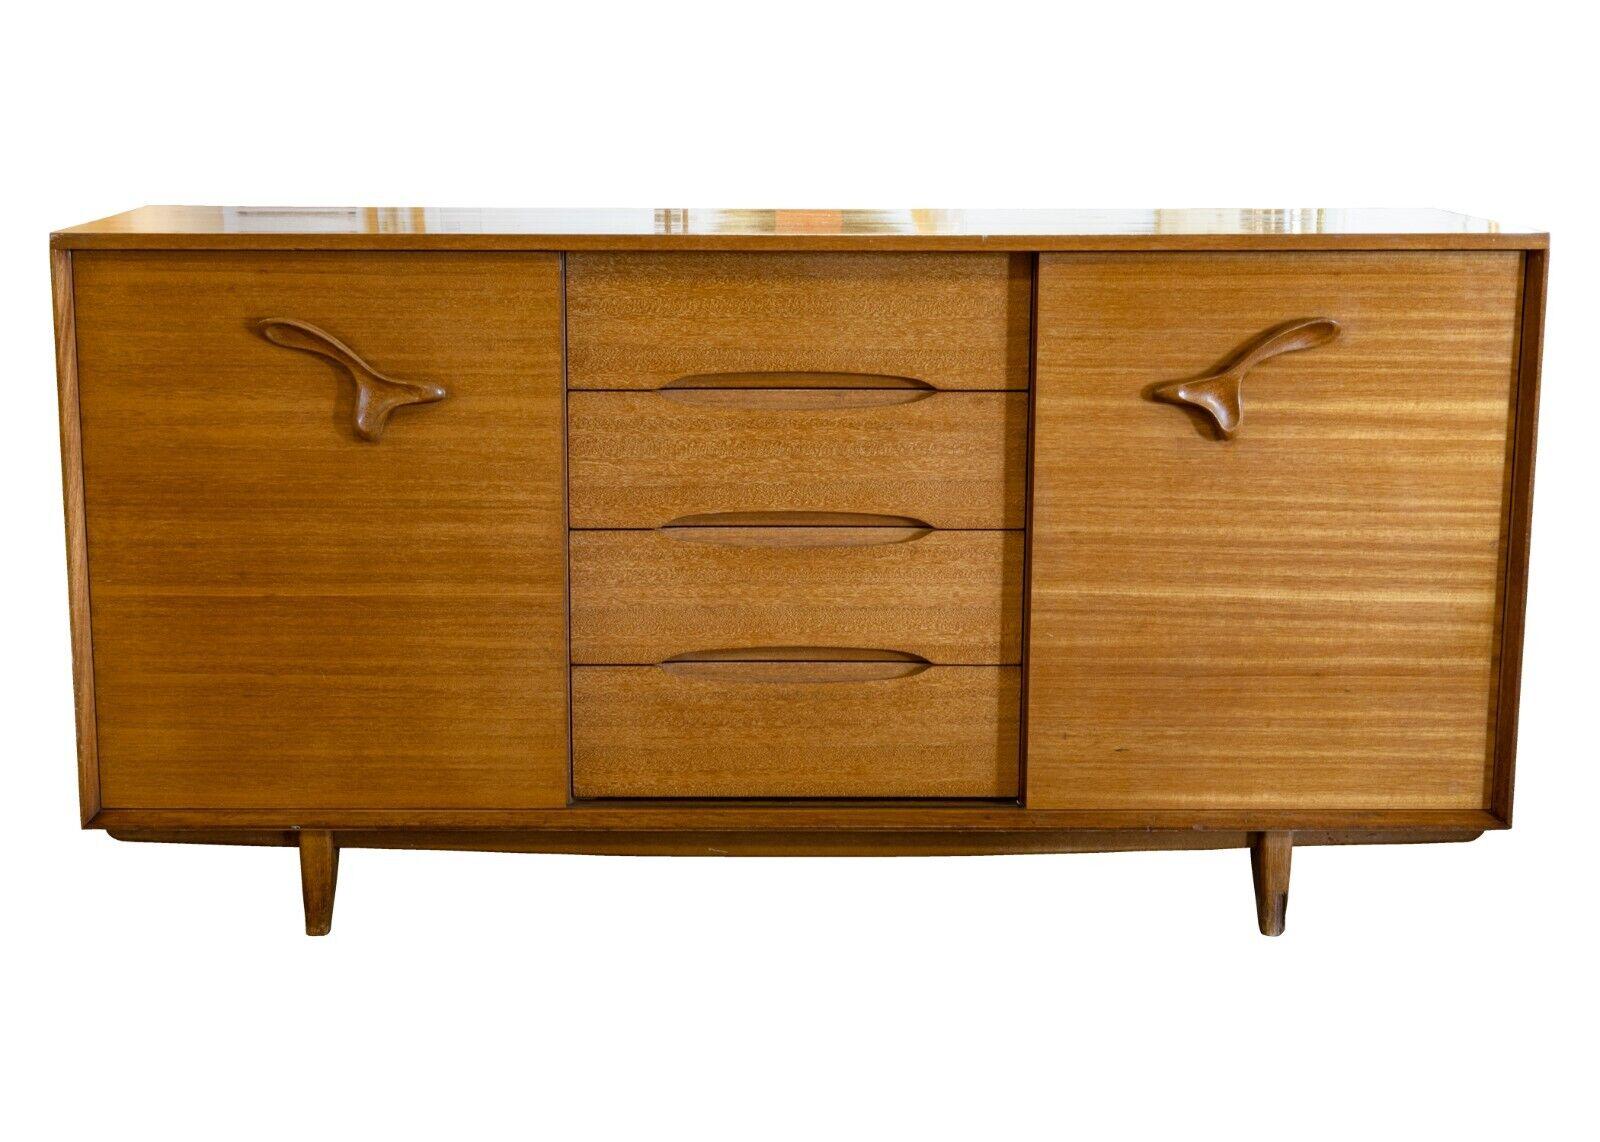 A Paul Laszlo for brown saltman dresser, nightstand, and 2 twin headboards. An absolutely stunning bedroom set from Paul Laszlo. The main 